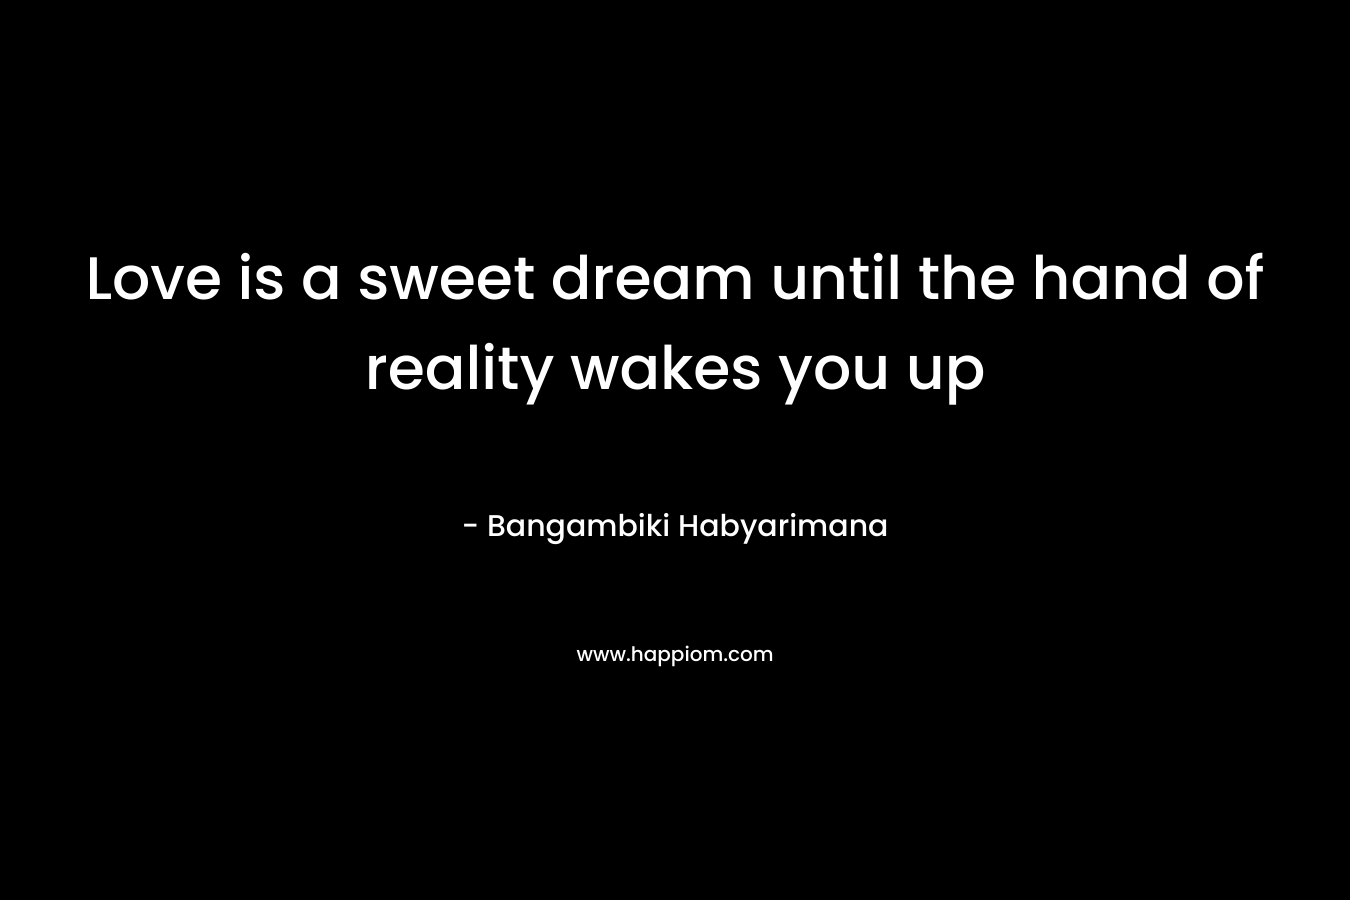 Love is a sweet dream until the hand of reality wakes you up